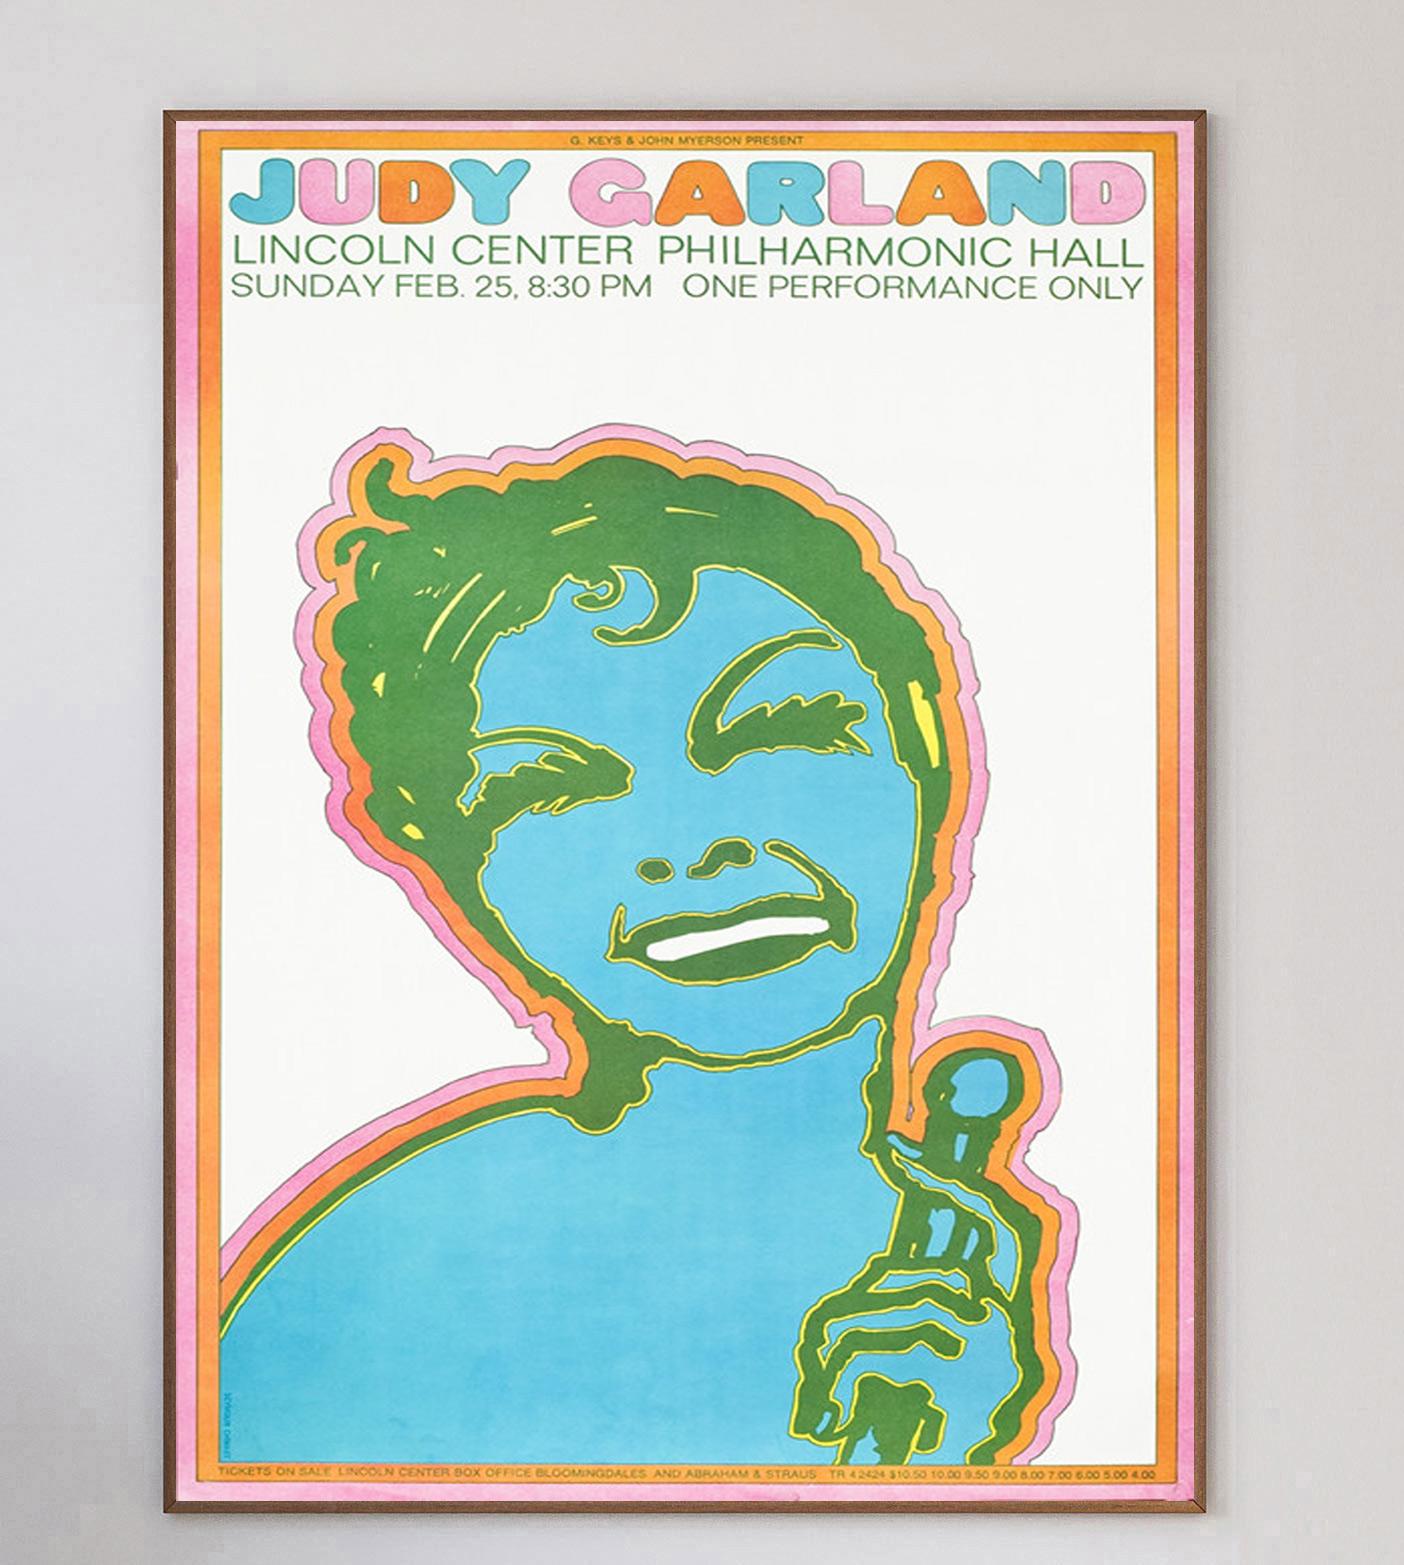 Wonderful poster advertising the iconic singer, actress and dancer Judy Garland's live concert at New York City's Lincoln Center Philharmonic Hall on February 28th 1968. The concert followed a long and tough nationwide tour, and saw Garland perform